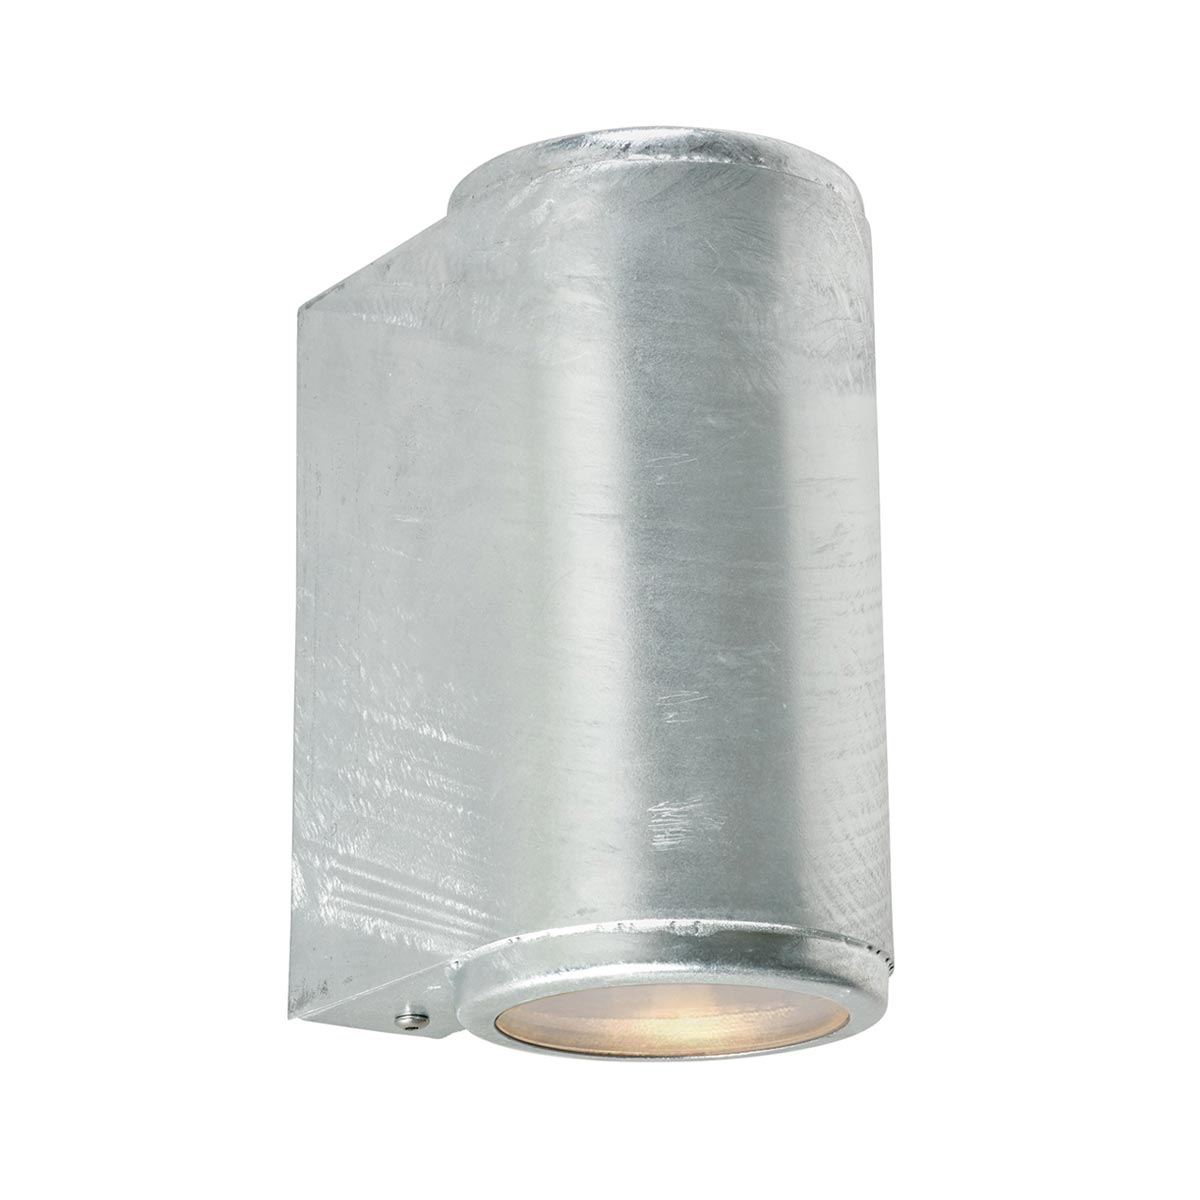 Norlys Mandal 2 Light Galvanised Outdoor Wall Up & Down Light IP44